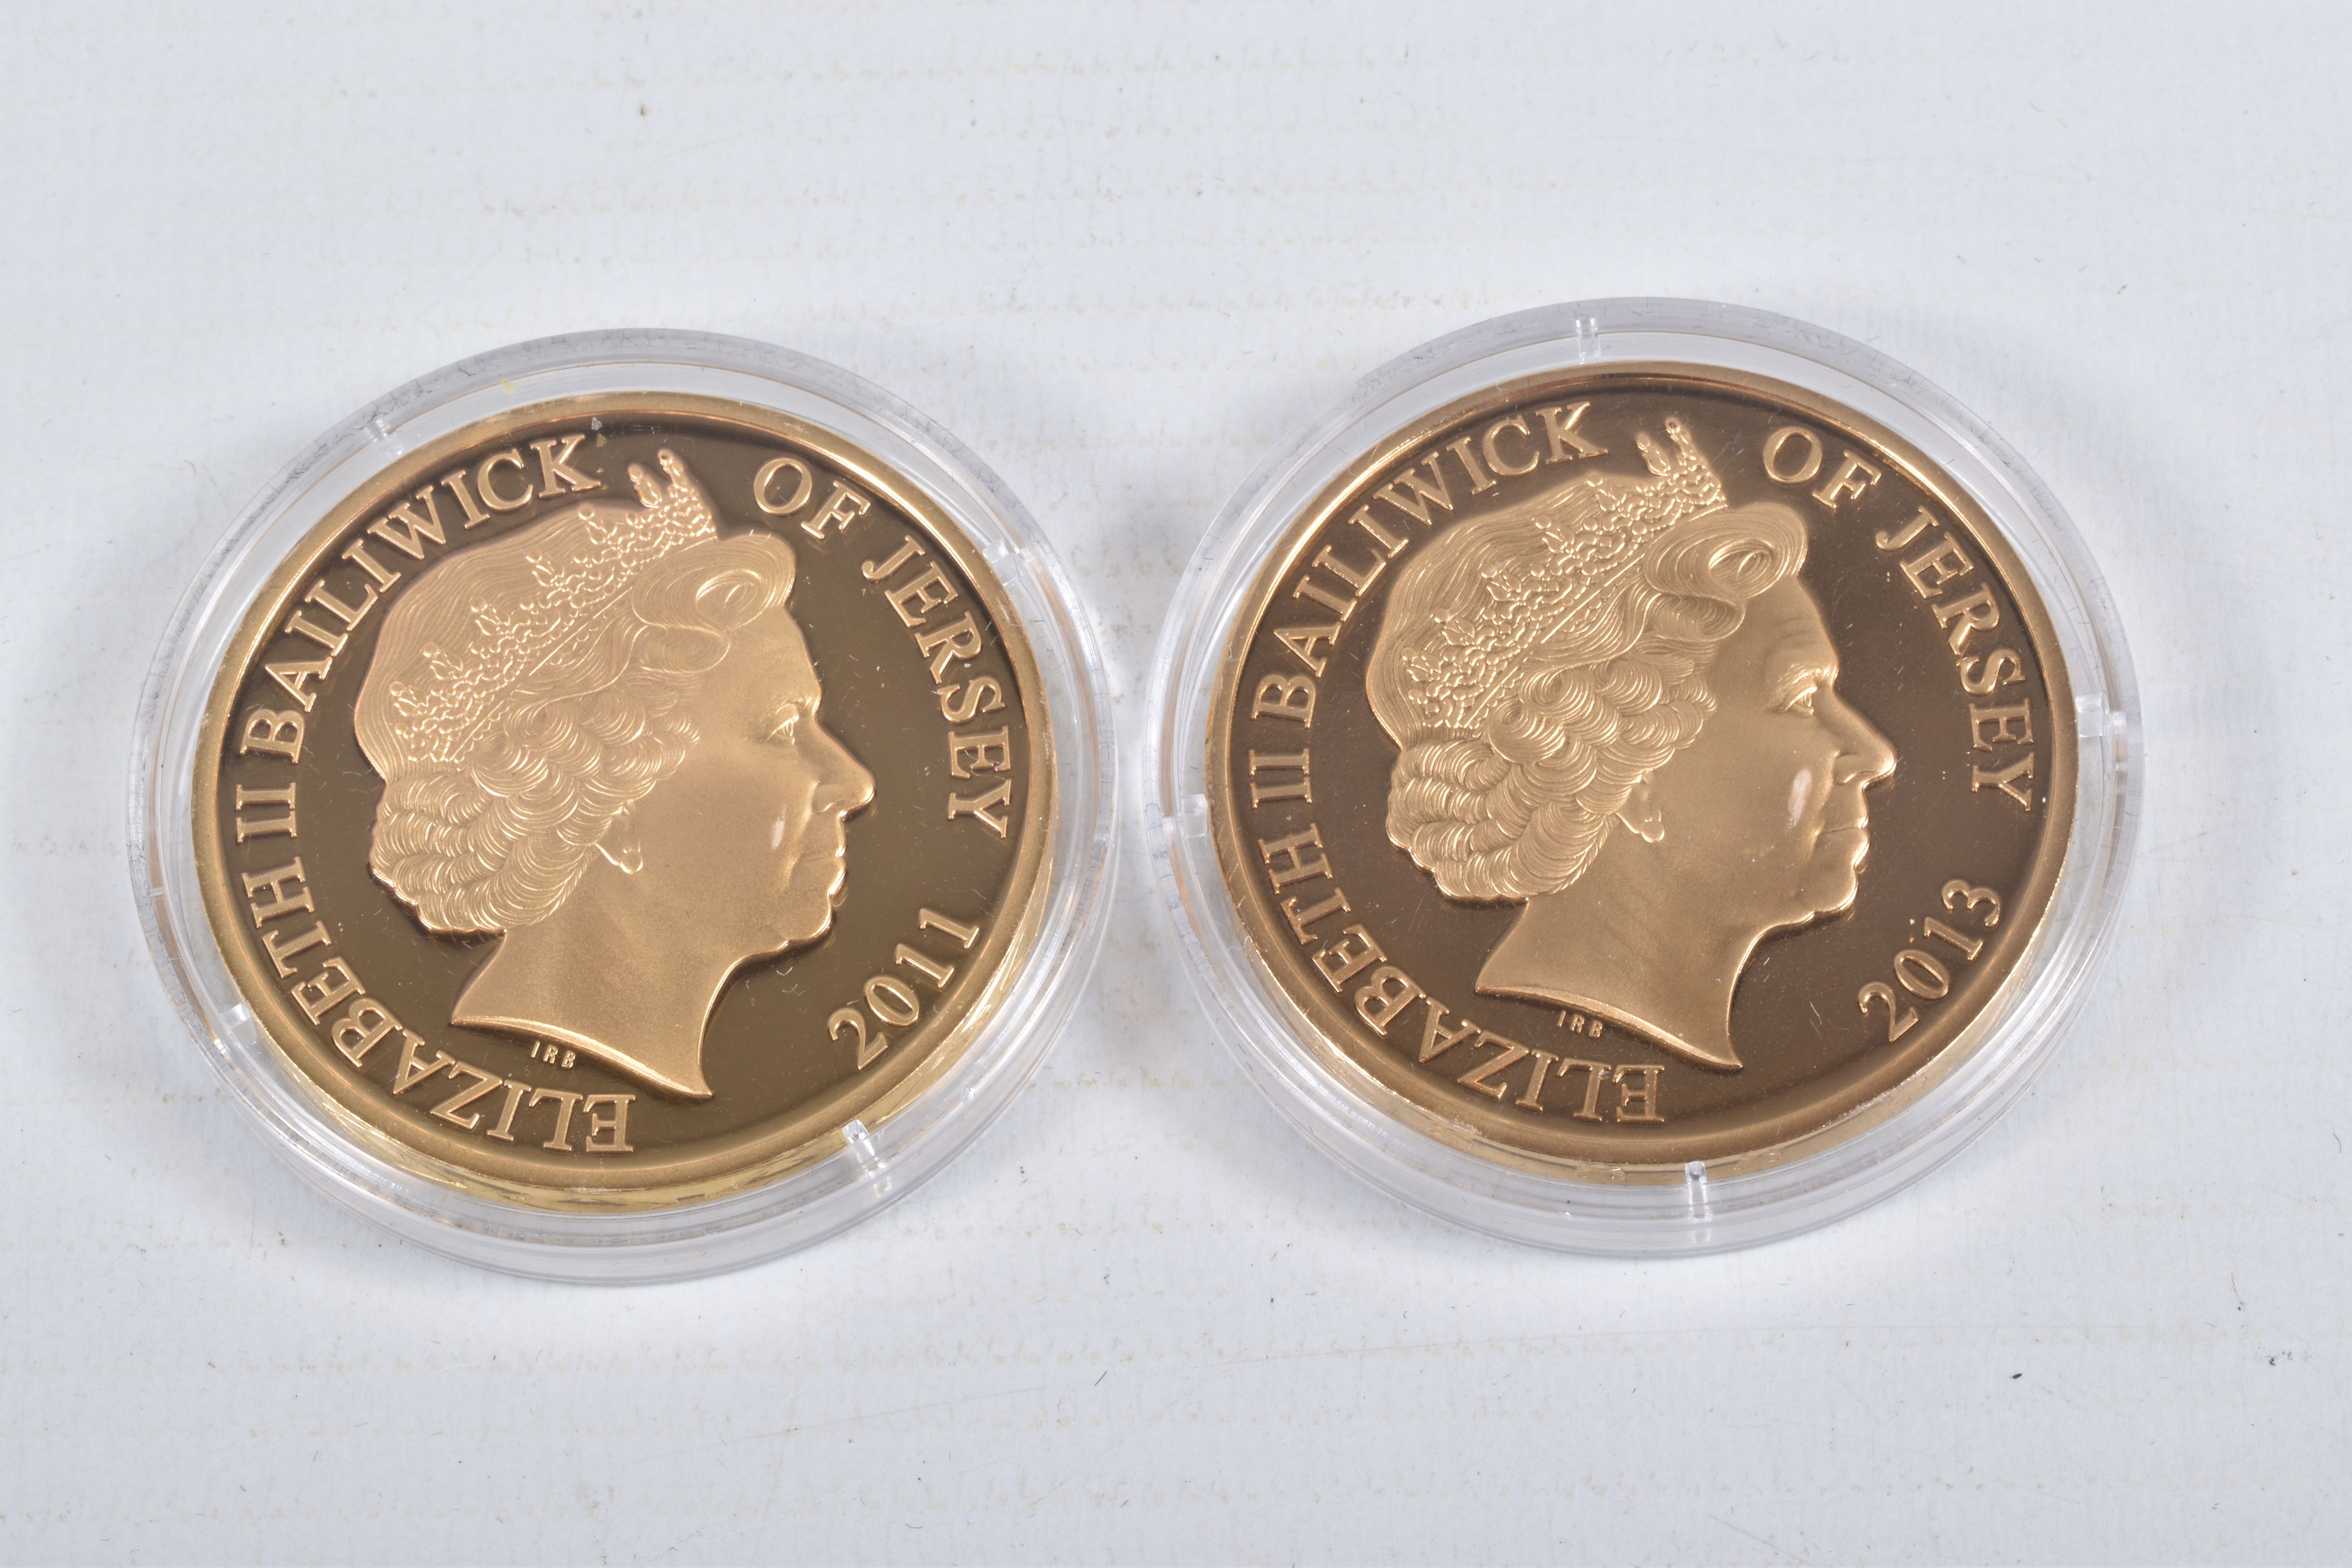 A PACKET CONTAINING SIX QUEEN ELIZABETH II 2011-13 GOLD LAYERED AND PICTORIAL COINS, Jersey, - Image 7 of 7